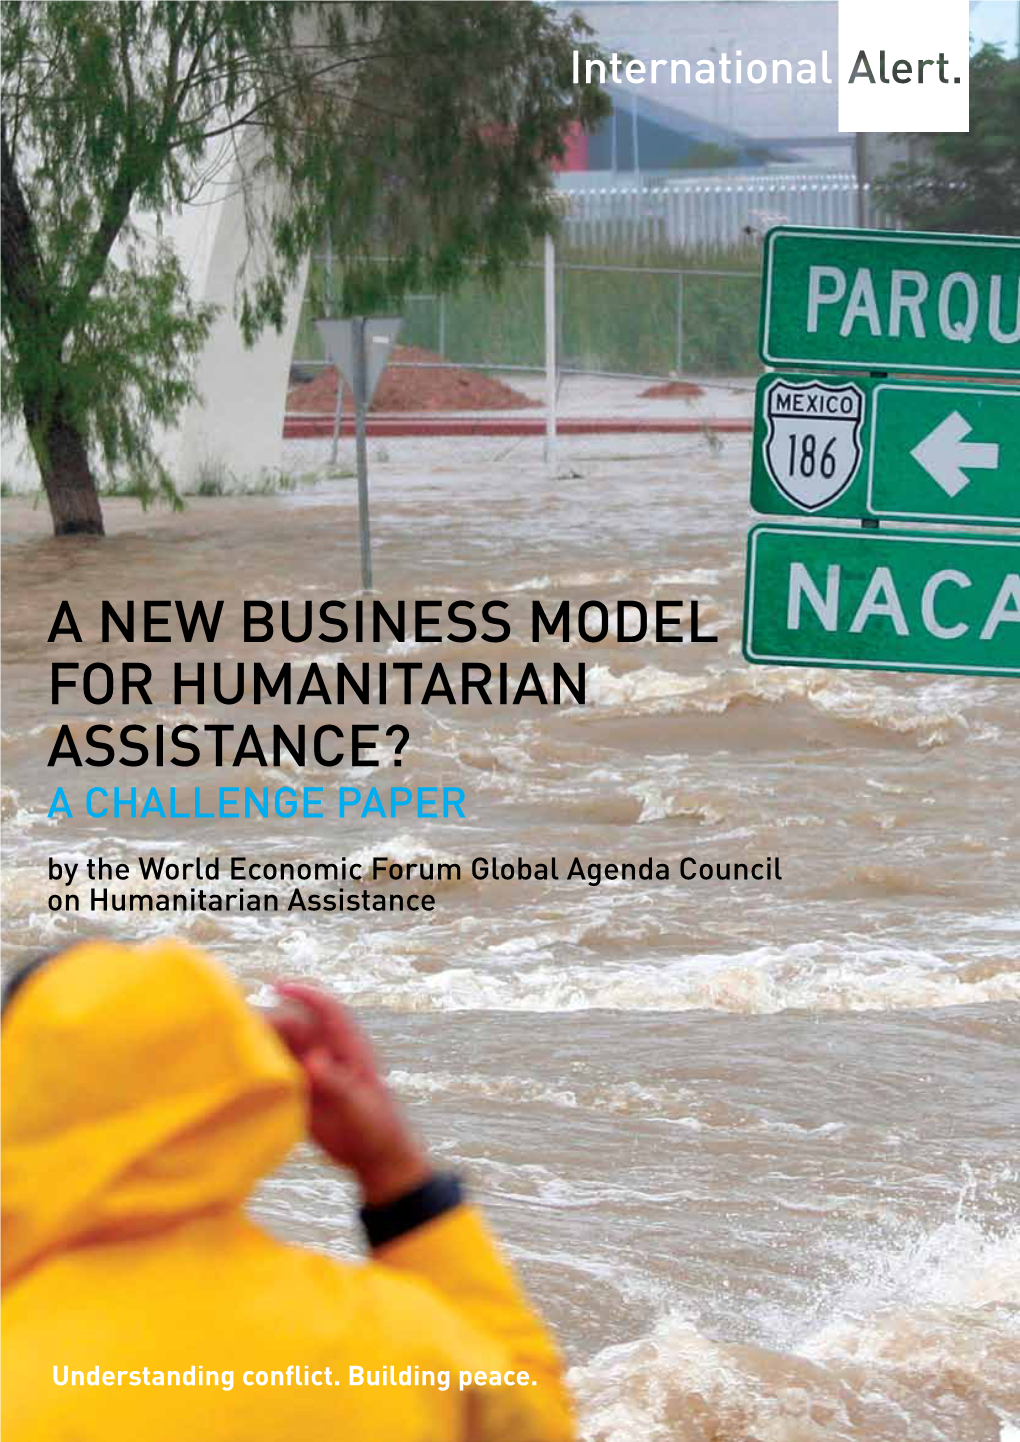 A New Business Model for Humanitarian Assistance? a Challenge Paper by the World Economic Forum Global Agenda Council on Humanitarian Assistance